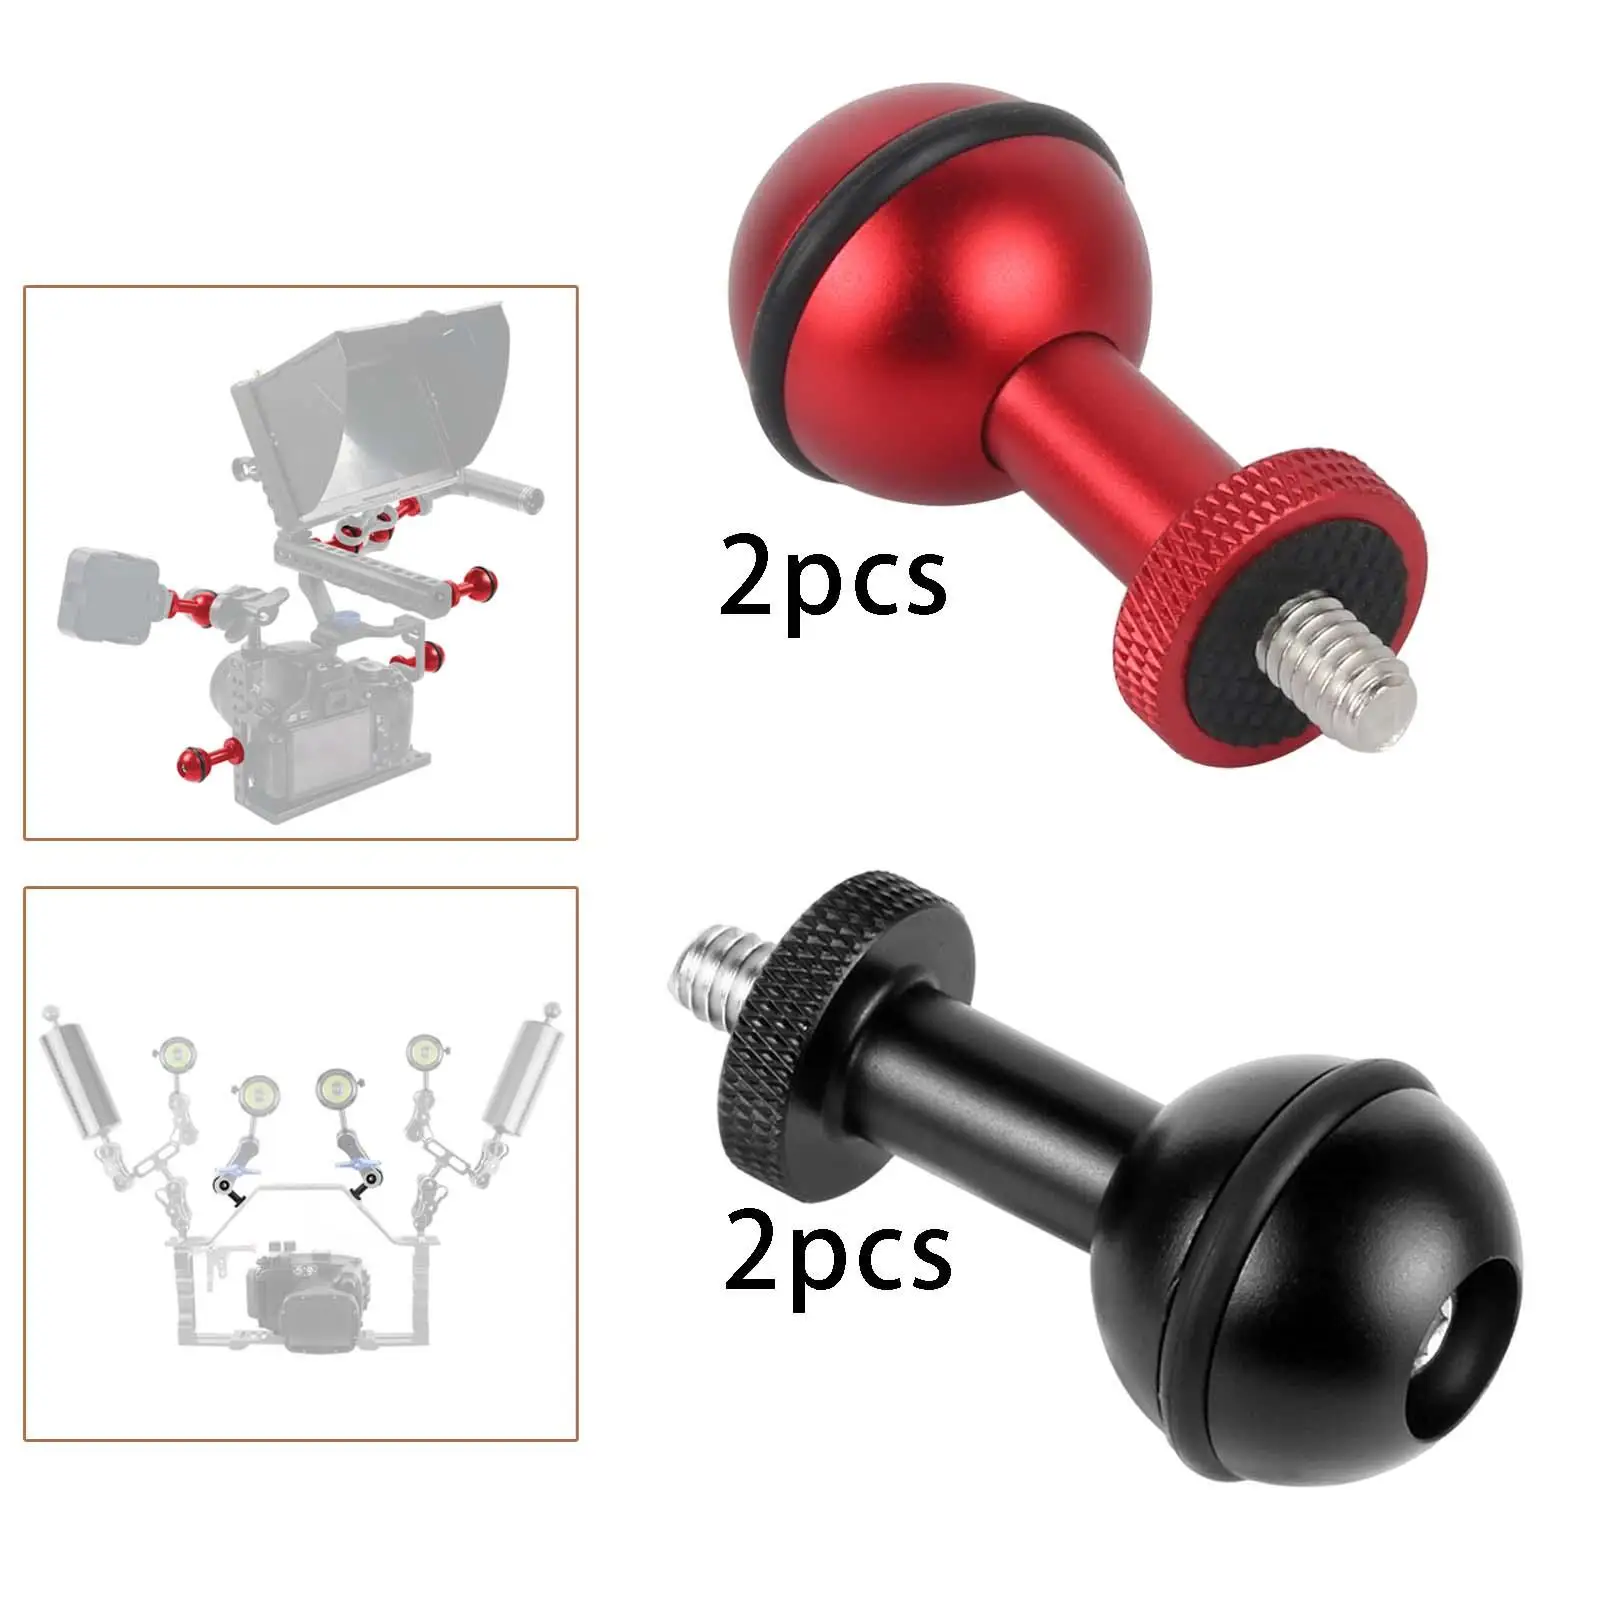 1inch Ball Head Adapter Photography Bracket Parts Fixed Mount Camera Screw Mount Adapter Parts for Camera Underwater Diving